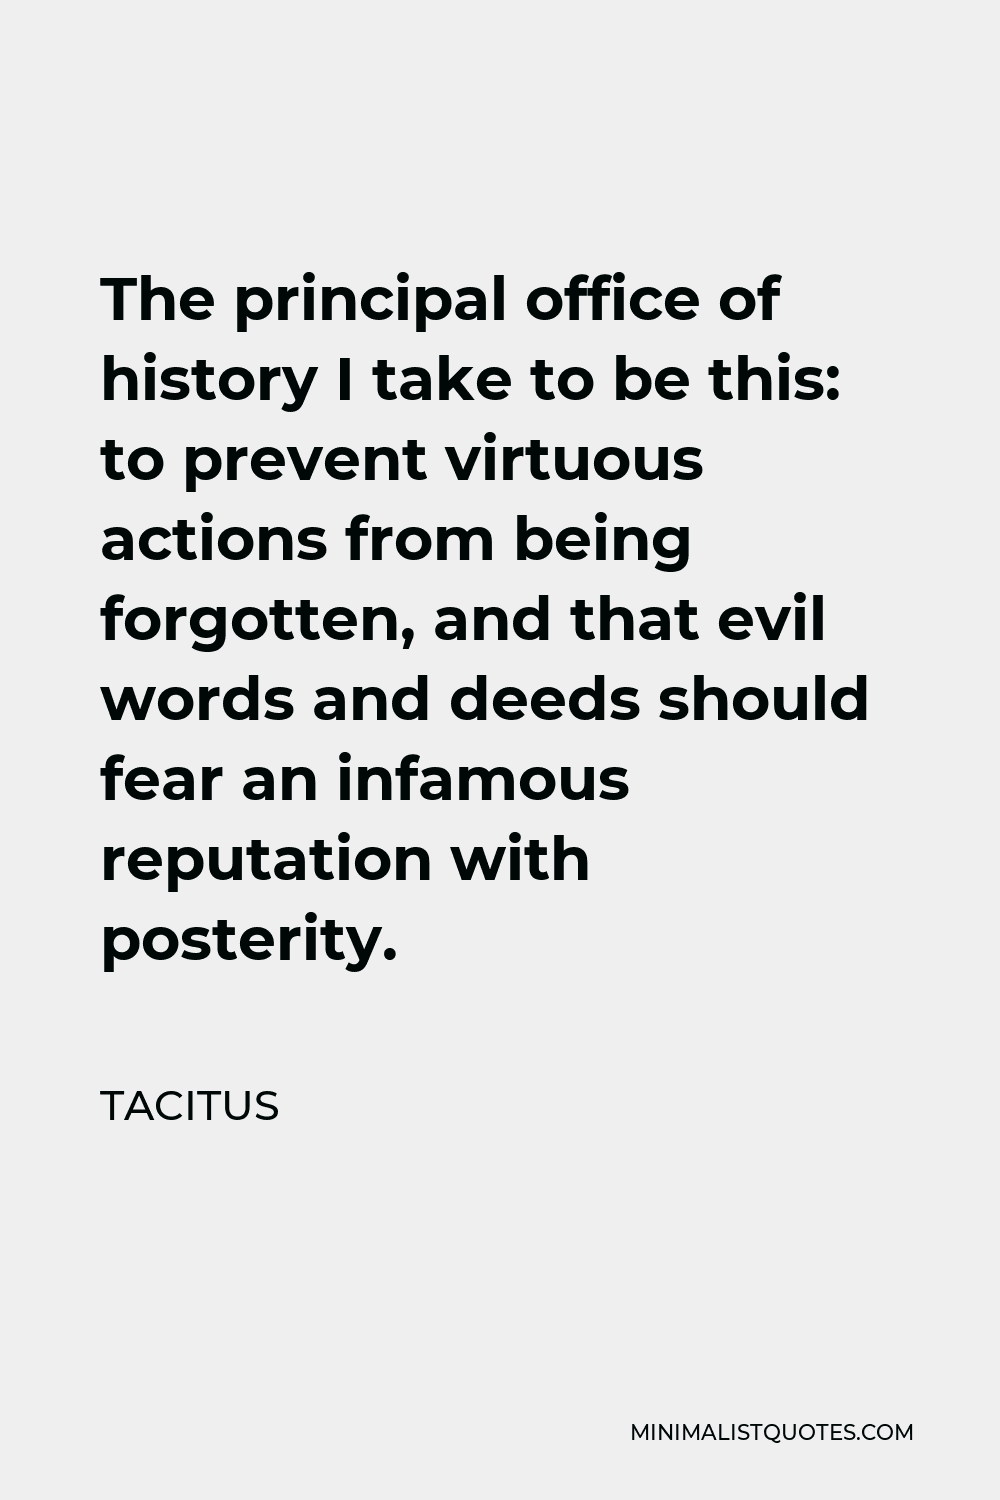 Tacitus Quote - The principal office of history I take to be this: to prevent virtuous actions from being forgotten, and that evil words and deeds should fear an infamous reputation with posterity.